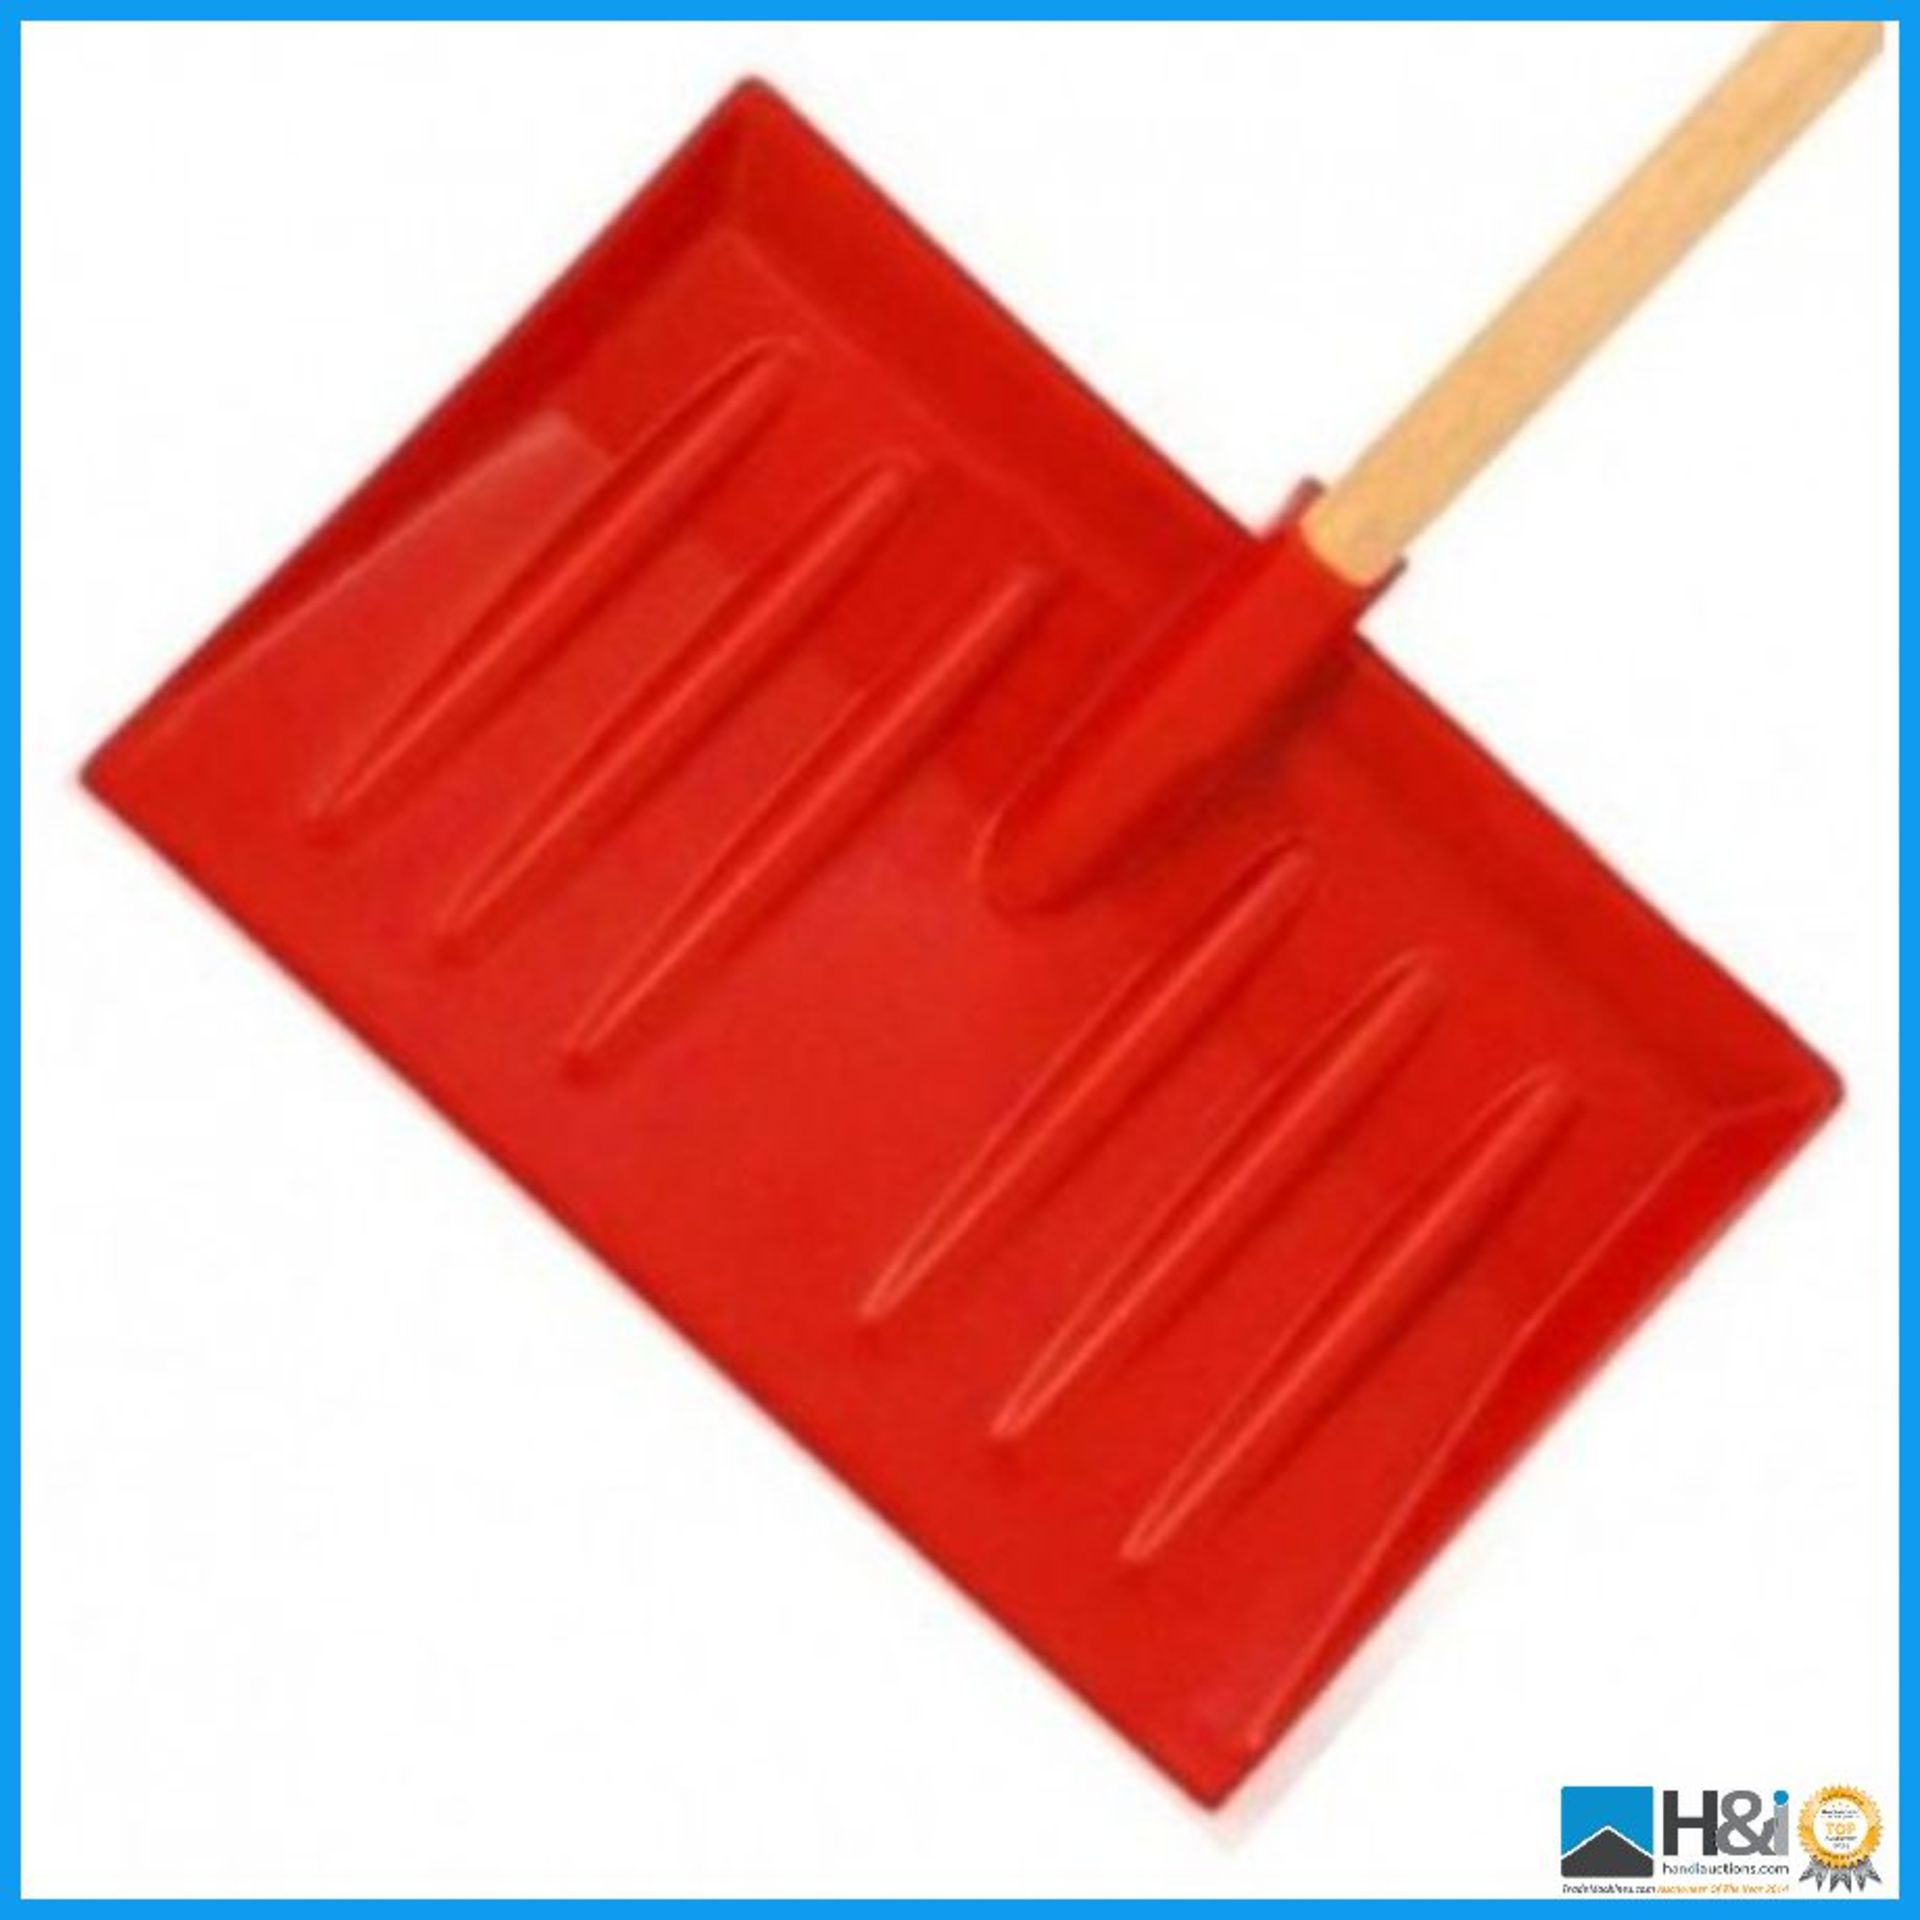 Industrial Snow Shovel with extra wide head and wooden handle. Snow shovel with a long wooden